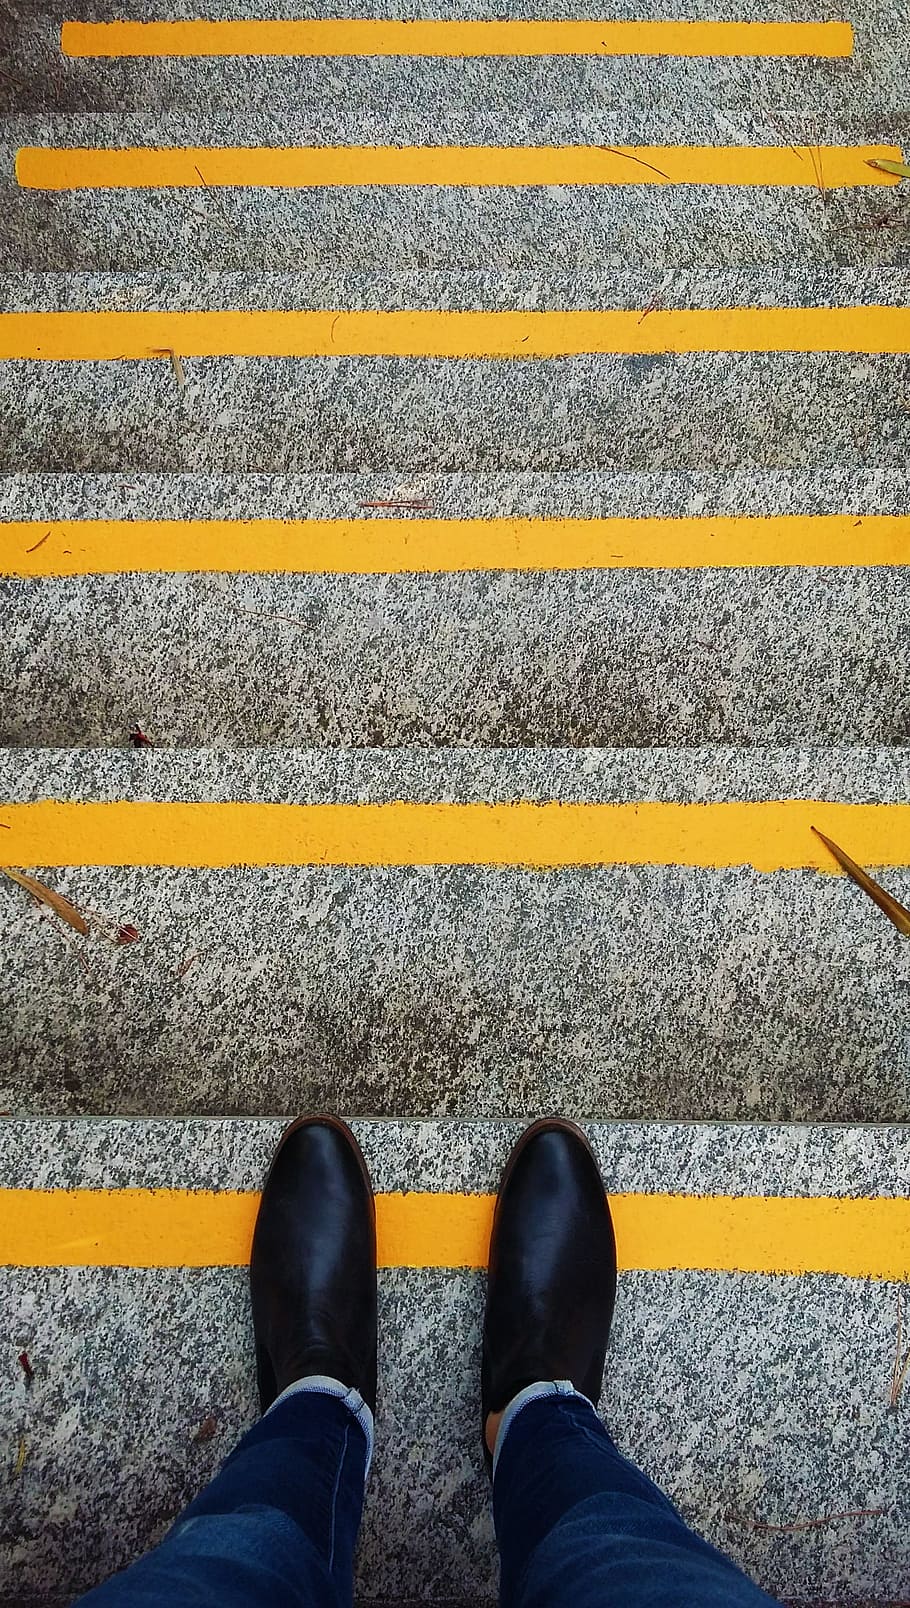 person, standing, yellow, lines, get down, descent, steps, walk, feet, shoes